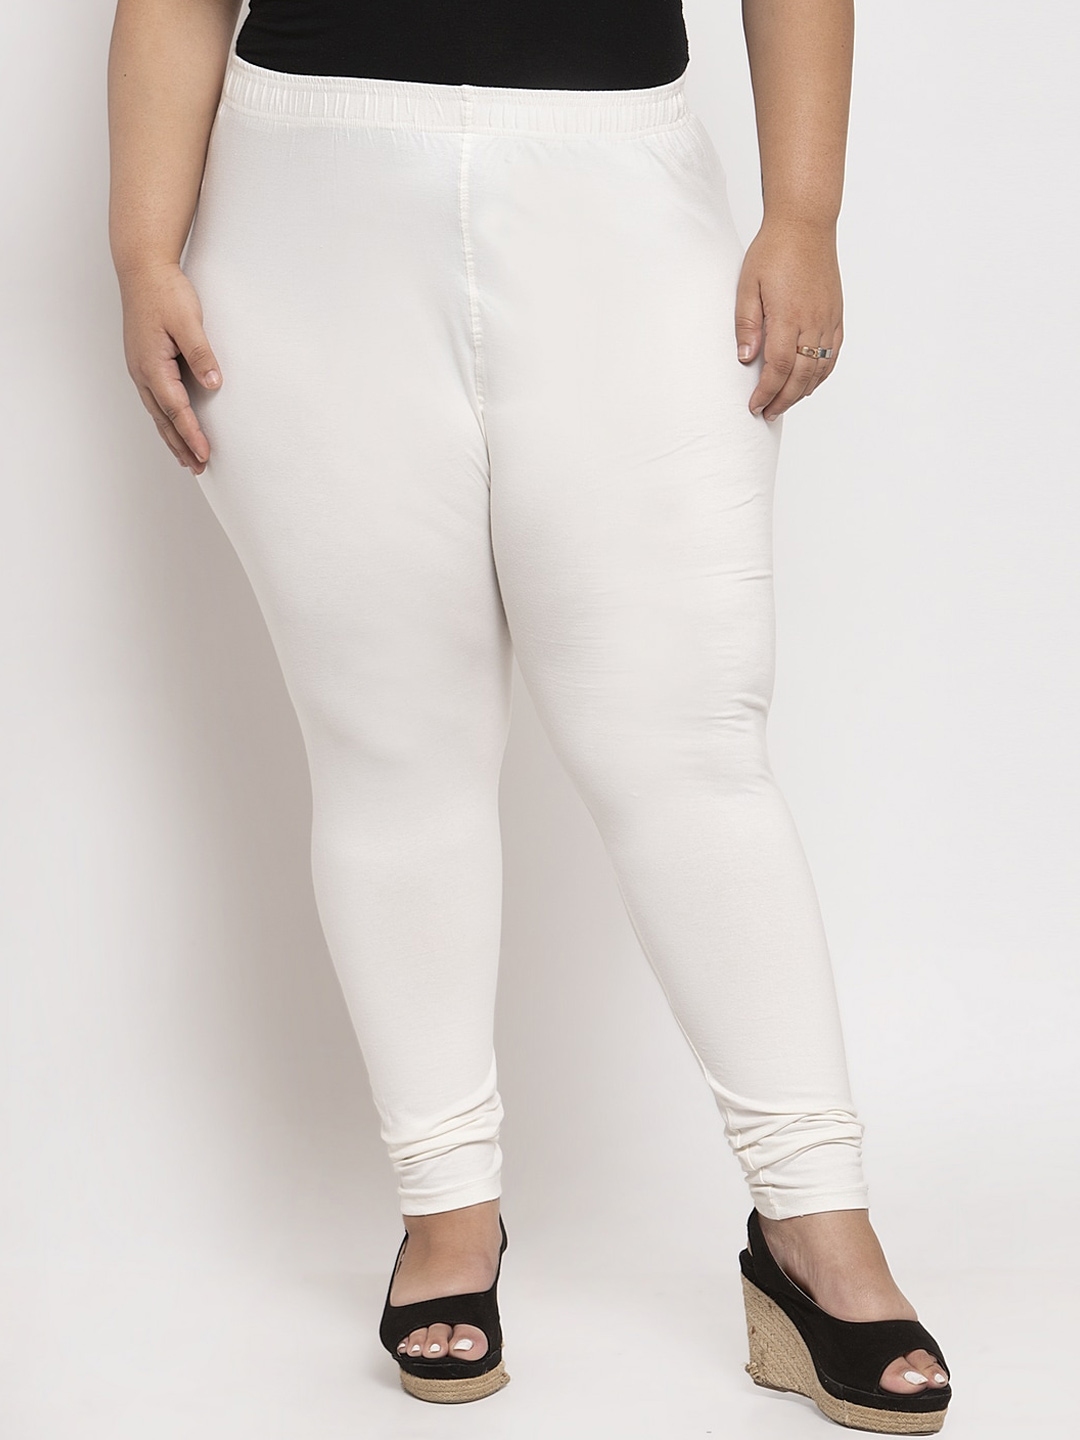 Plus Size Off White Leggings  International Society of Precision  Agriculture